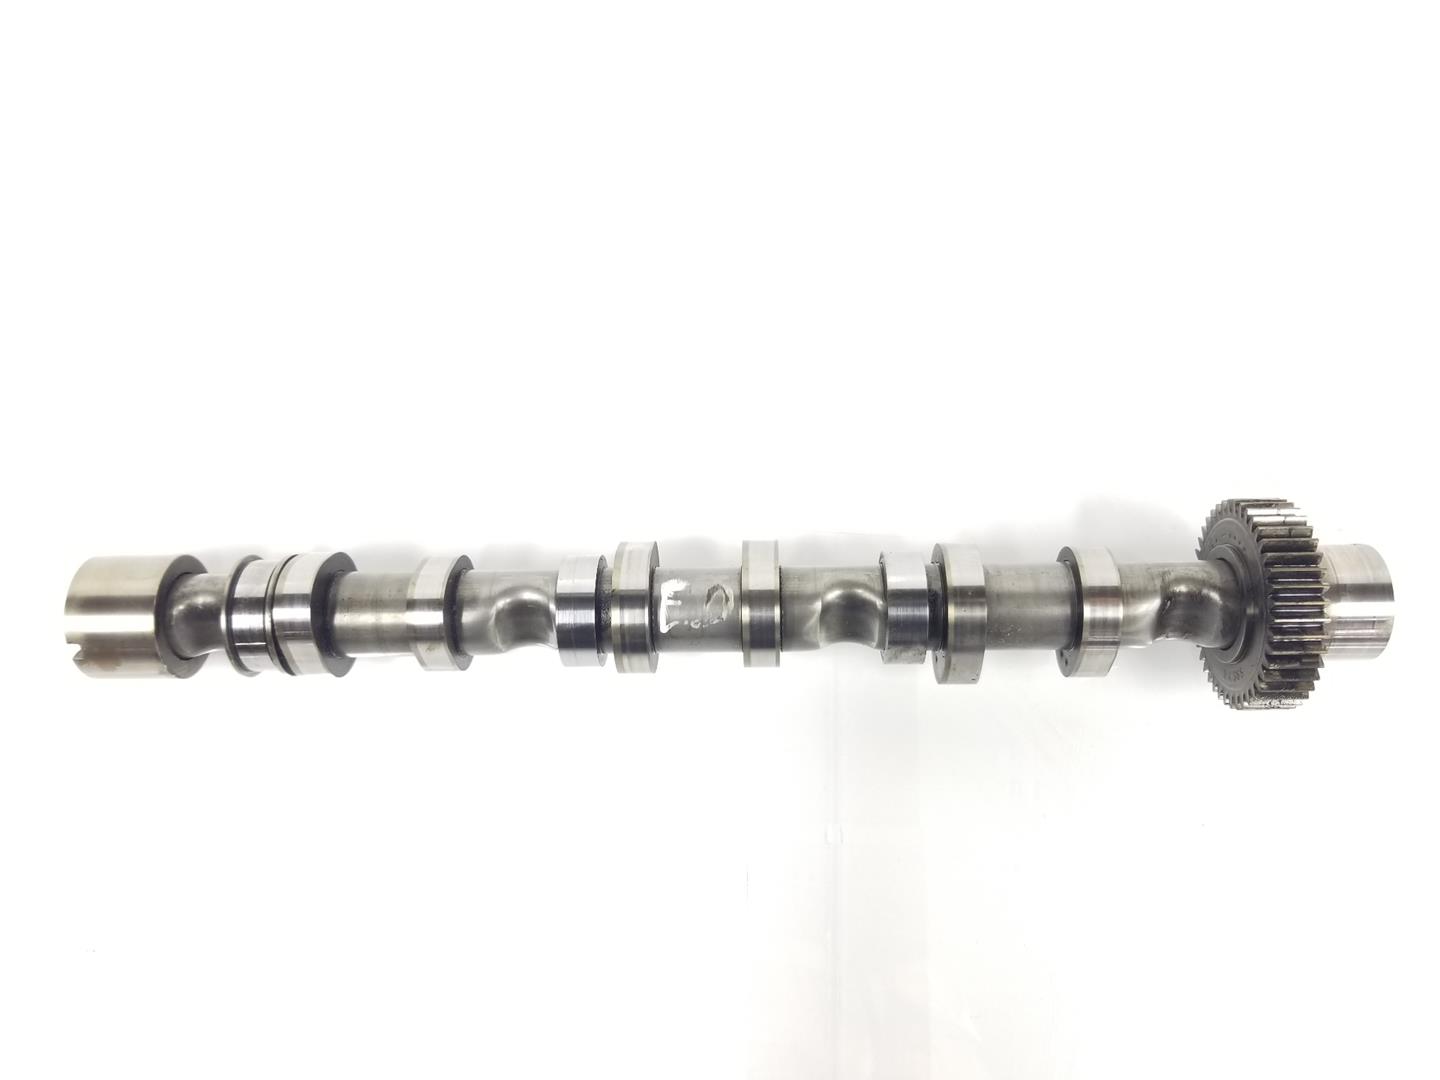 VOLKSWAGEN Touareg 1 generation (2002-2010) Exhaust Camshaft 059109022BE, 059109022BE, CILINDROS1-3 19782090